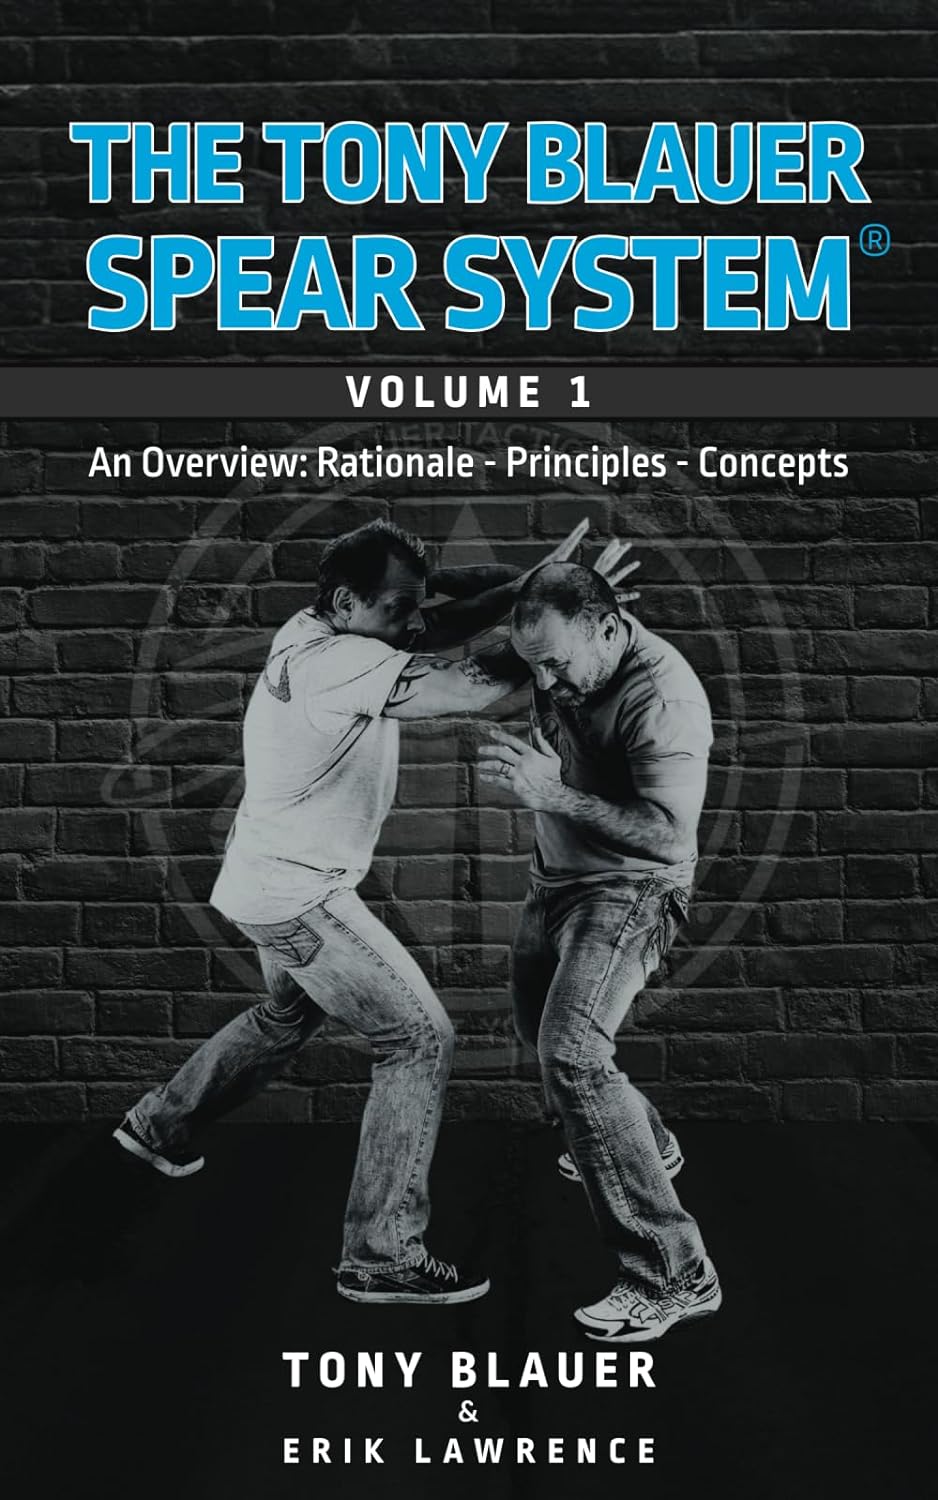 The Tony Blauer SPEAR System Book